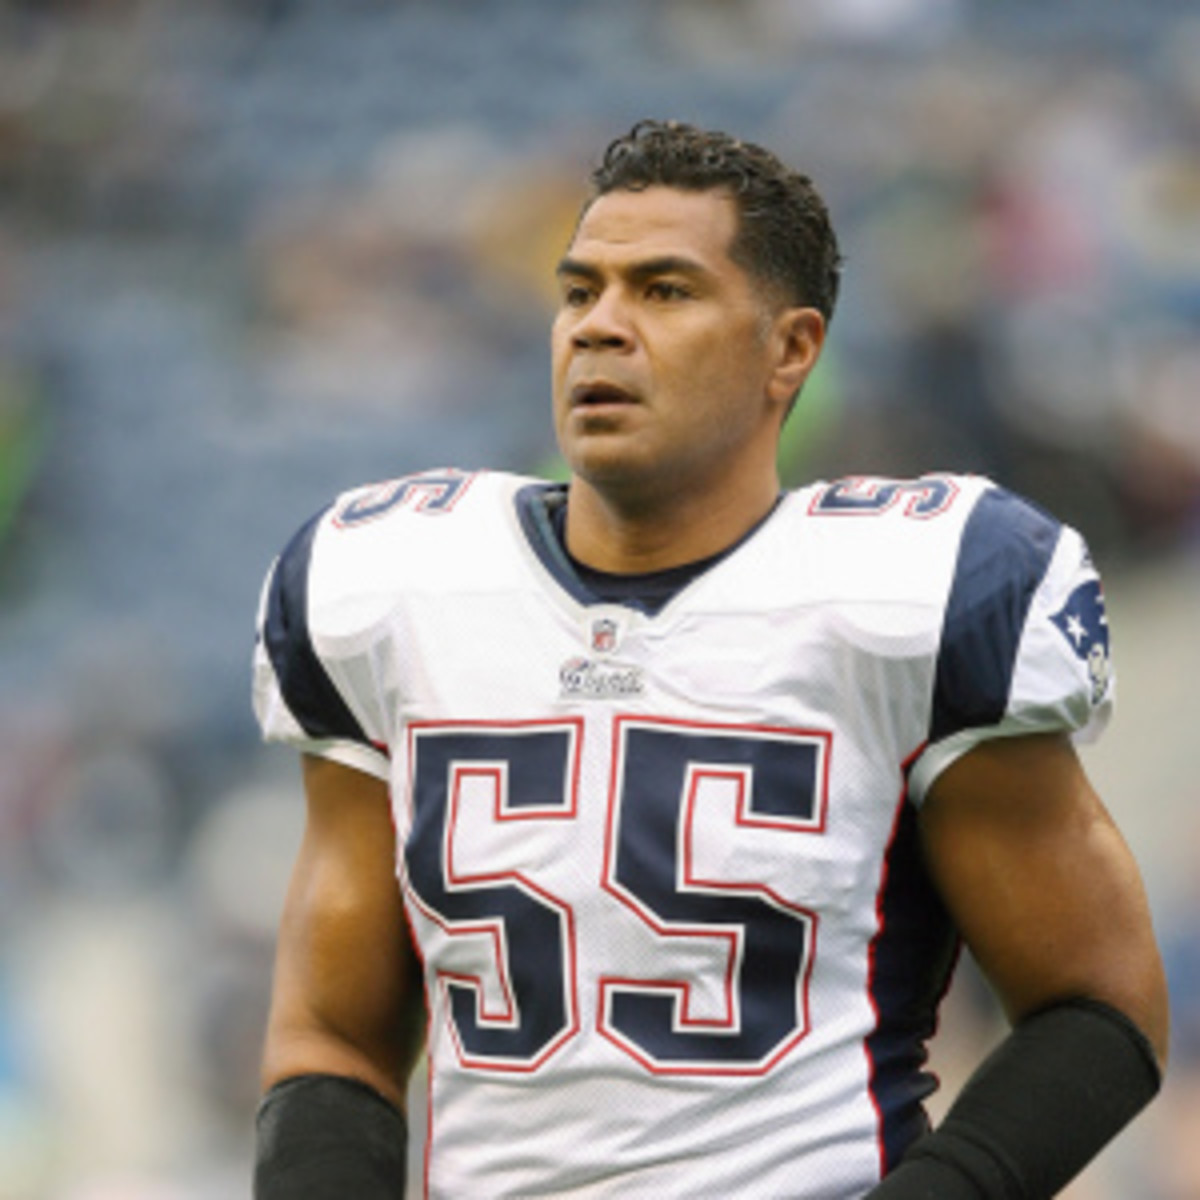 Junior Seau's family is suing the NFL in a wrongful death lawsuit. (Otto Greule Jr/Getty Images)